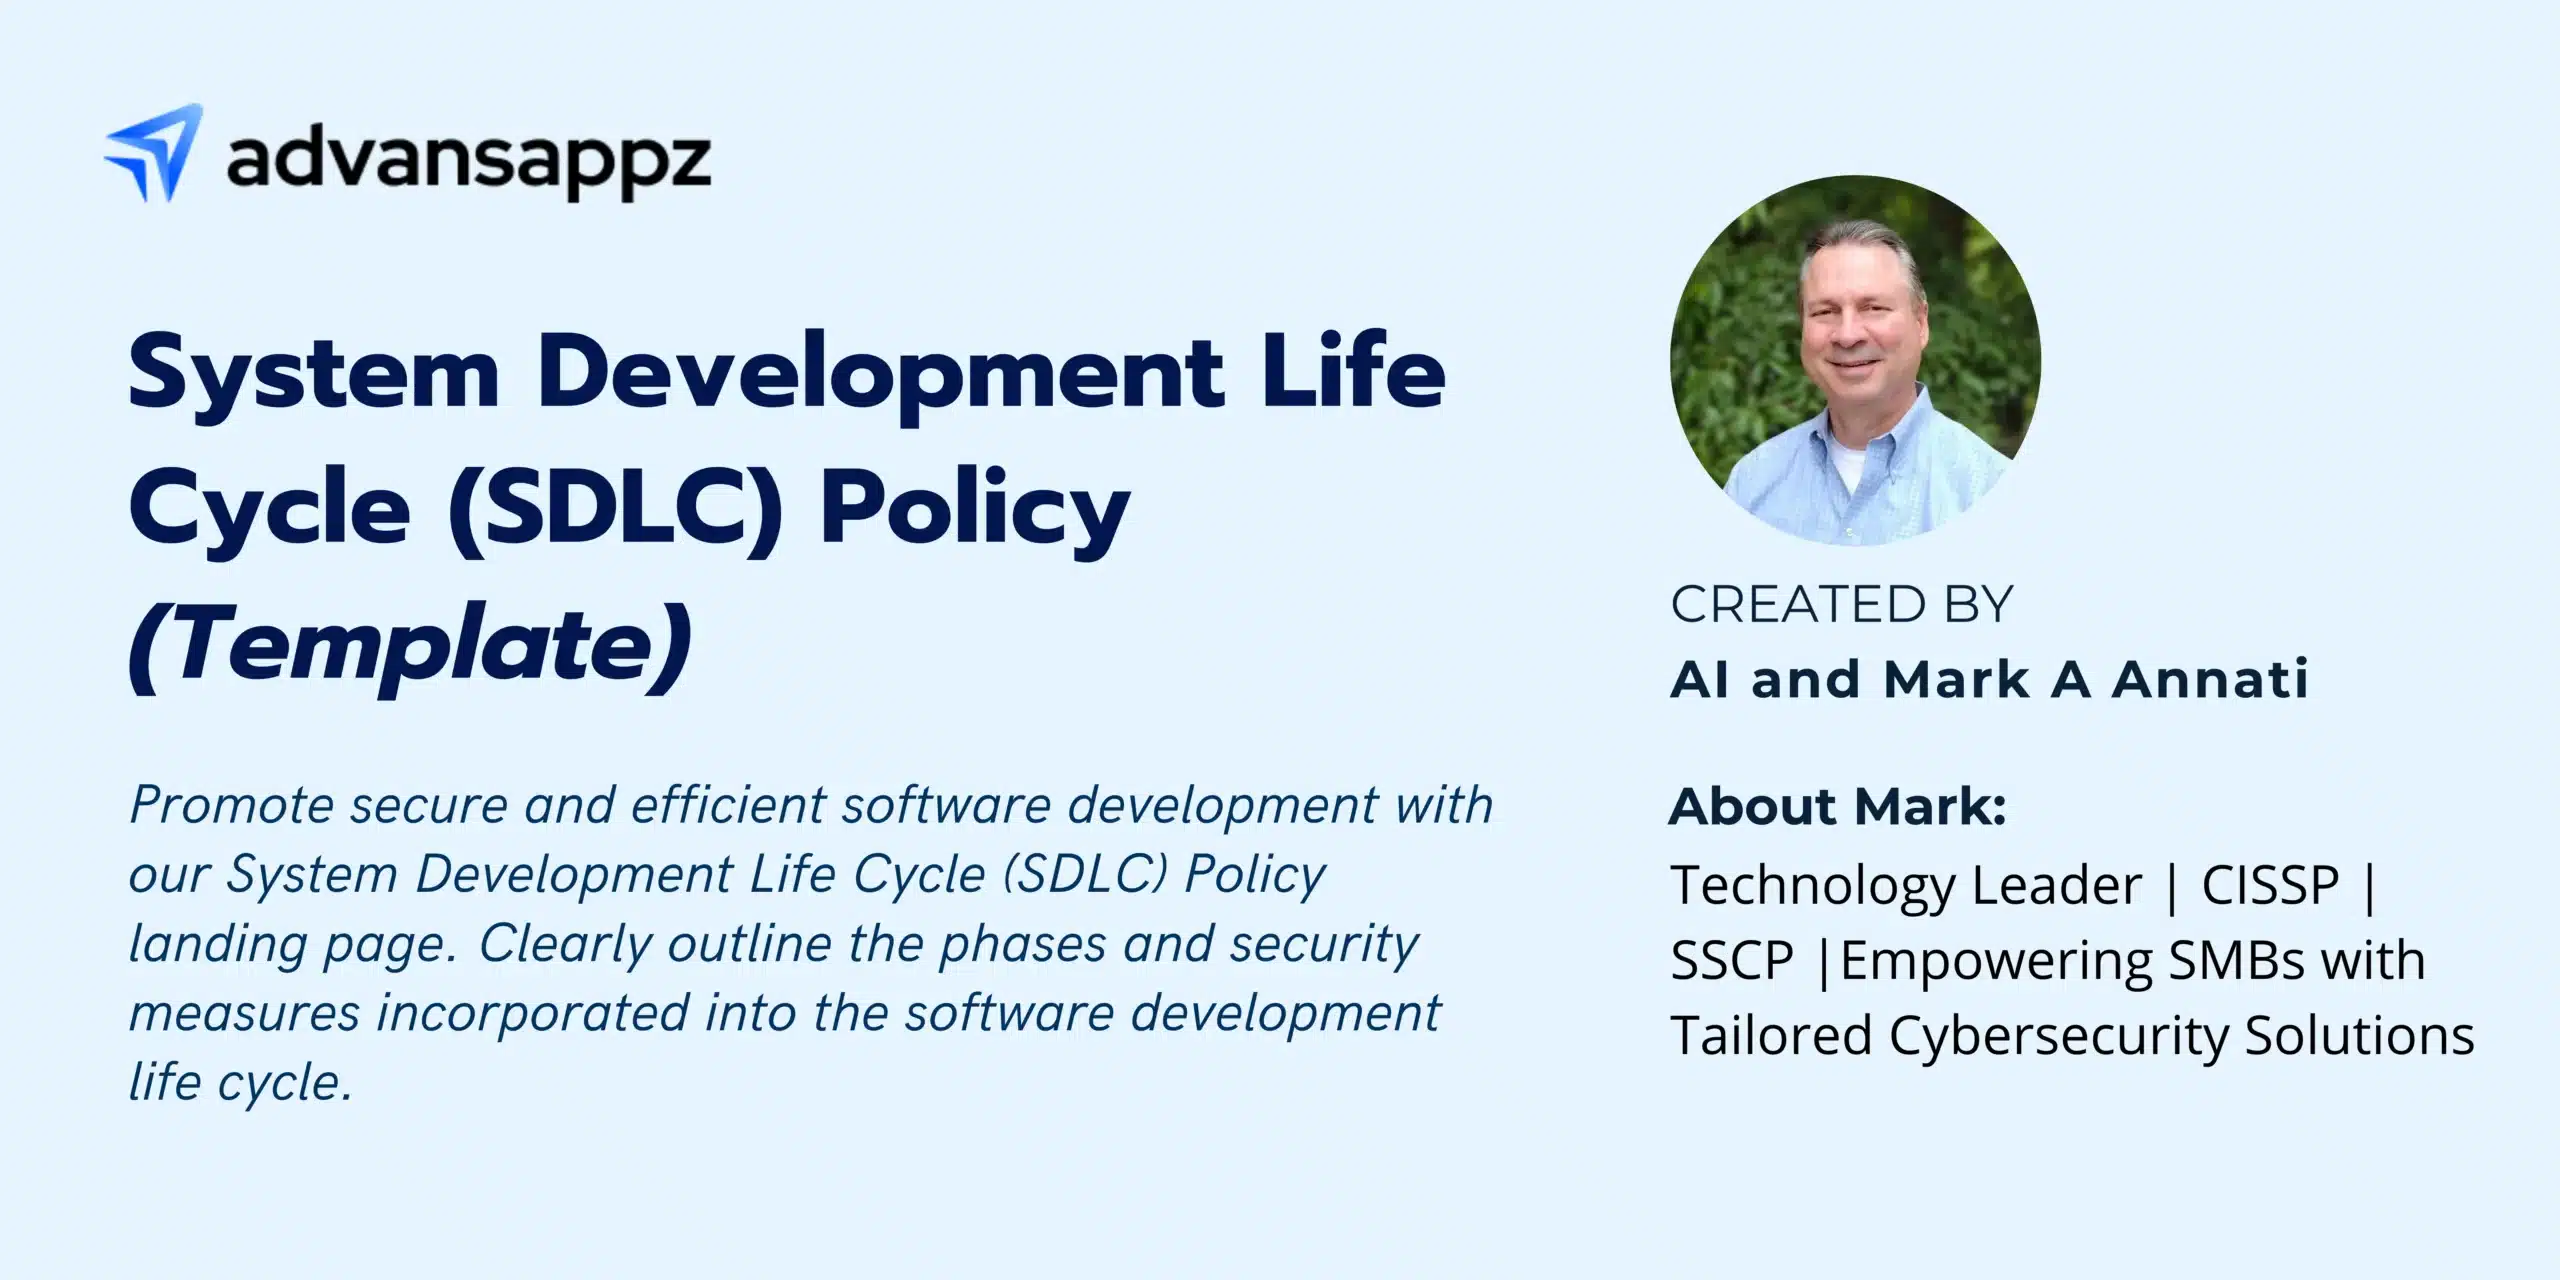 System Development Life Cycle (SDLC) Policy